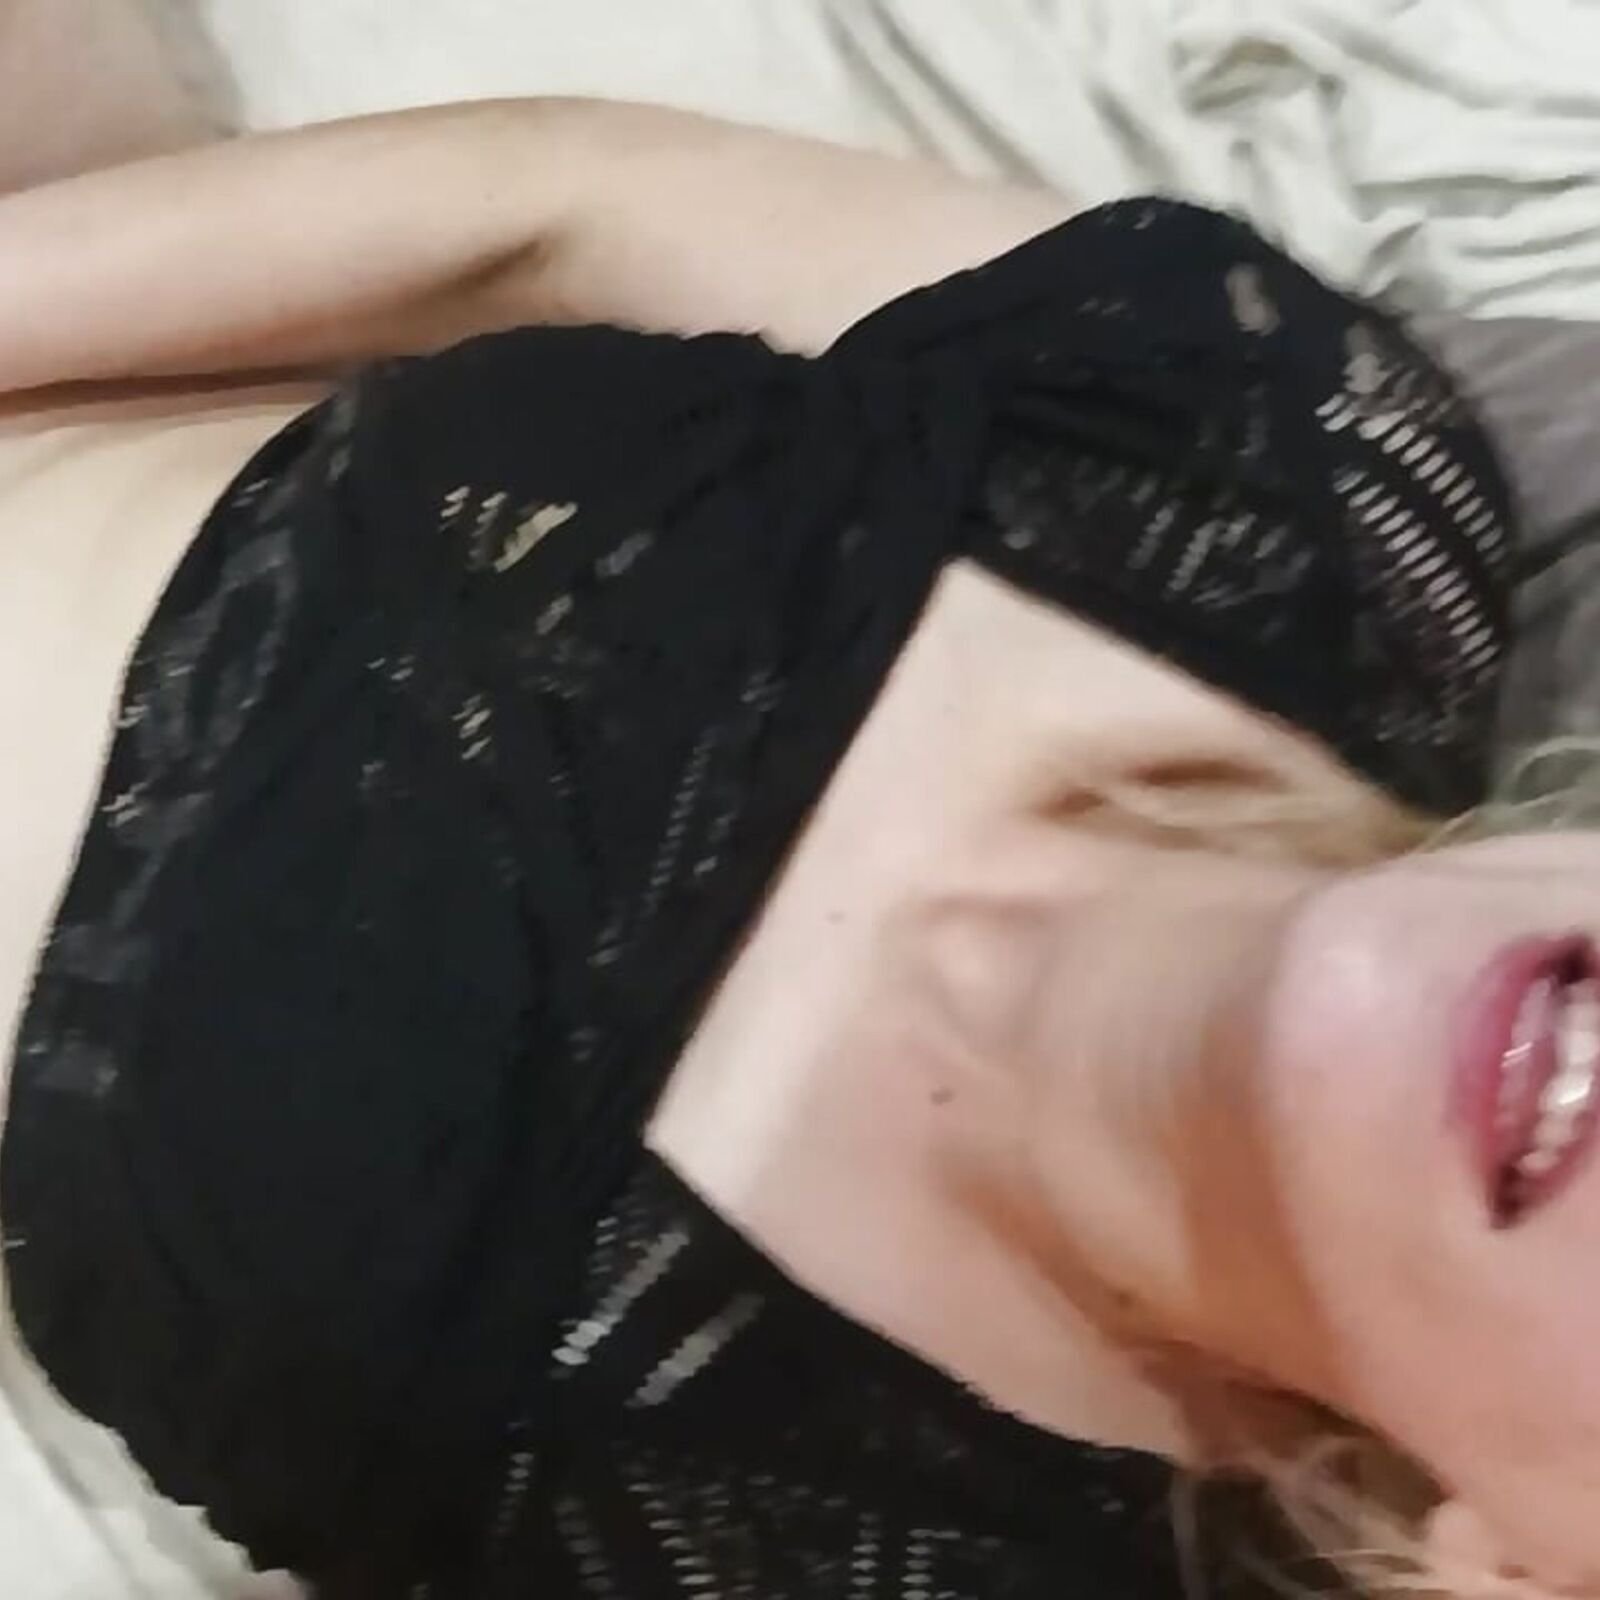 Caught Masturbating, He Joins and Cum on my Face and Mouth Deepthroat